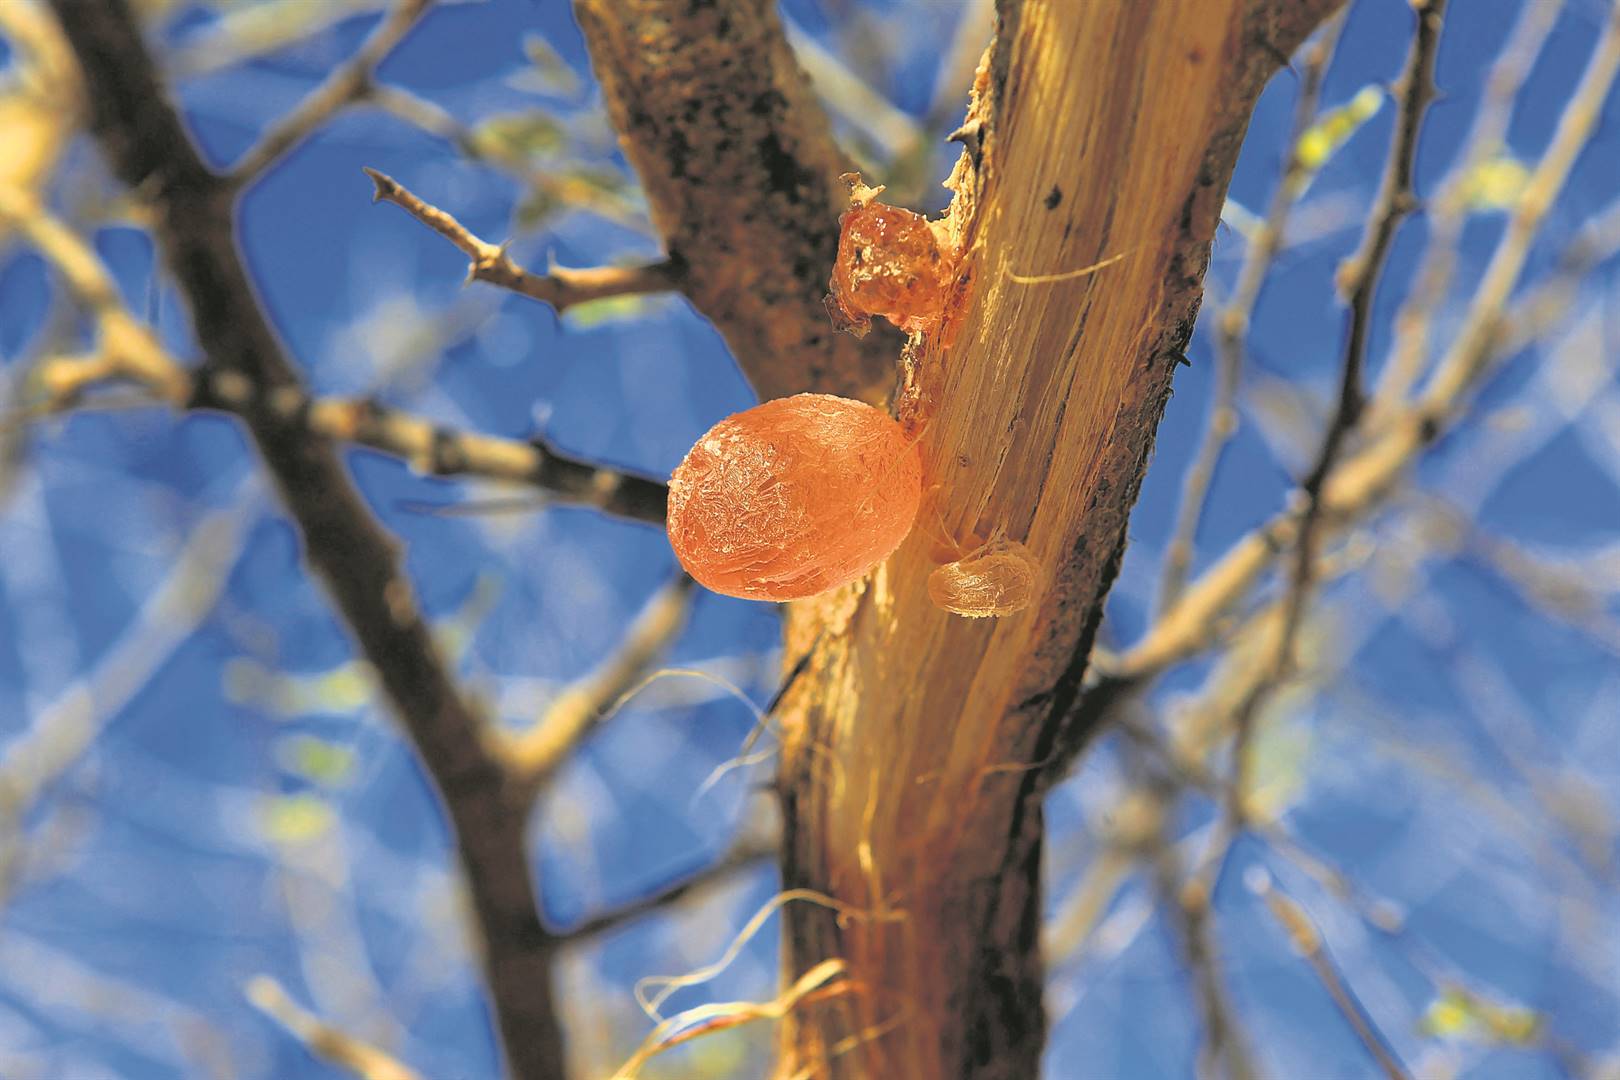 Global demand for gum arabic is high, with manufacturers scrambling to secure stock during the war in Sudan. Photo: Reuters